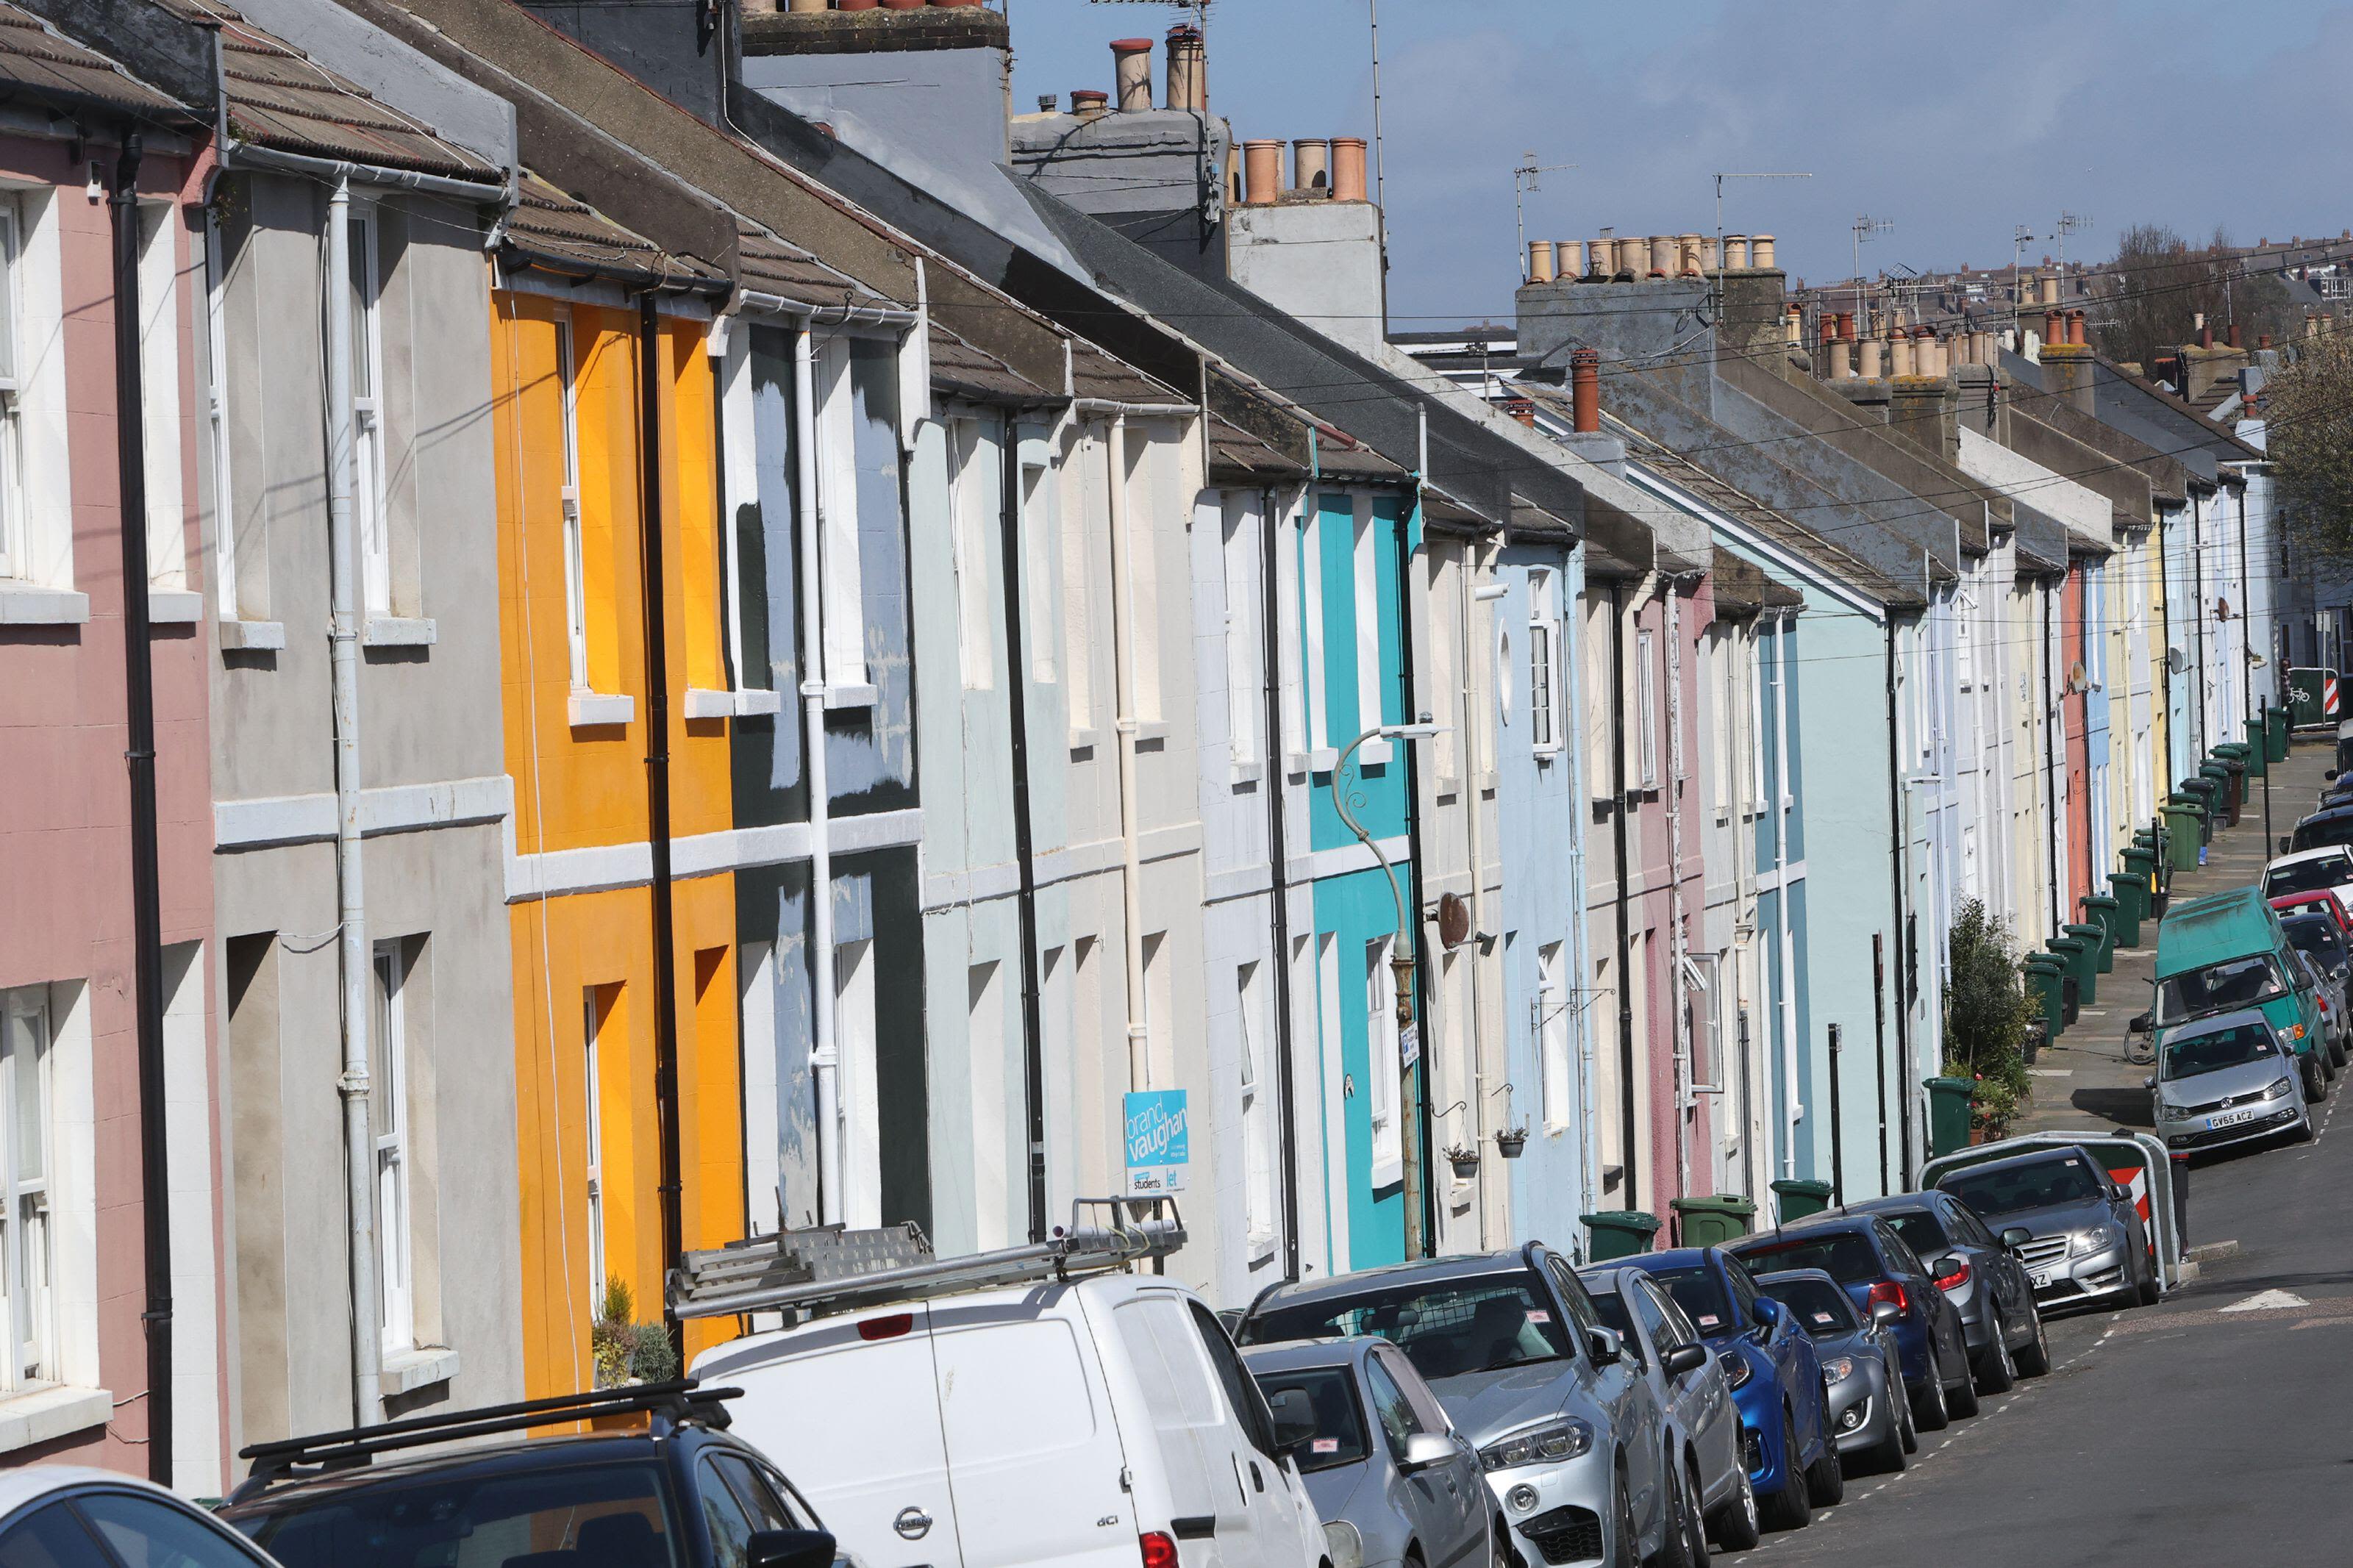 UK house prices rise for first time in three months